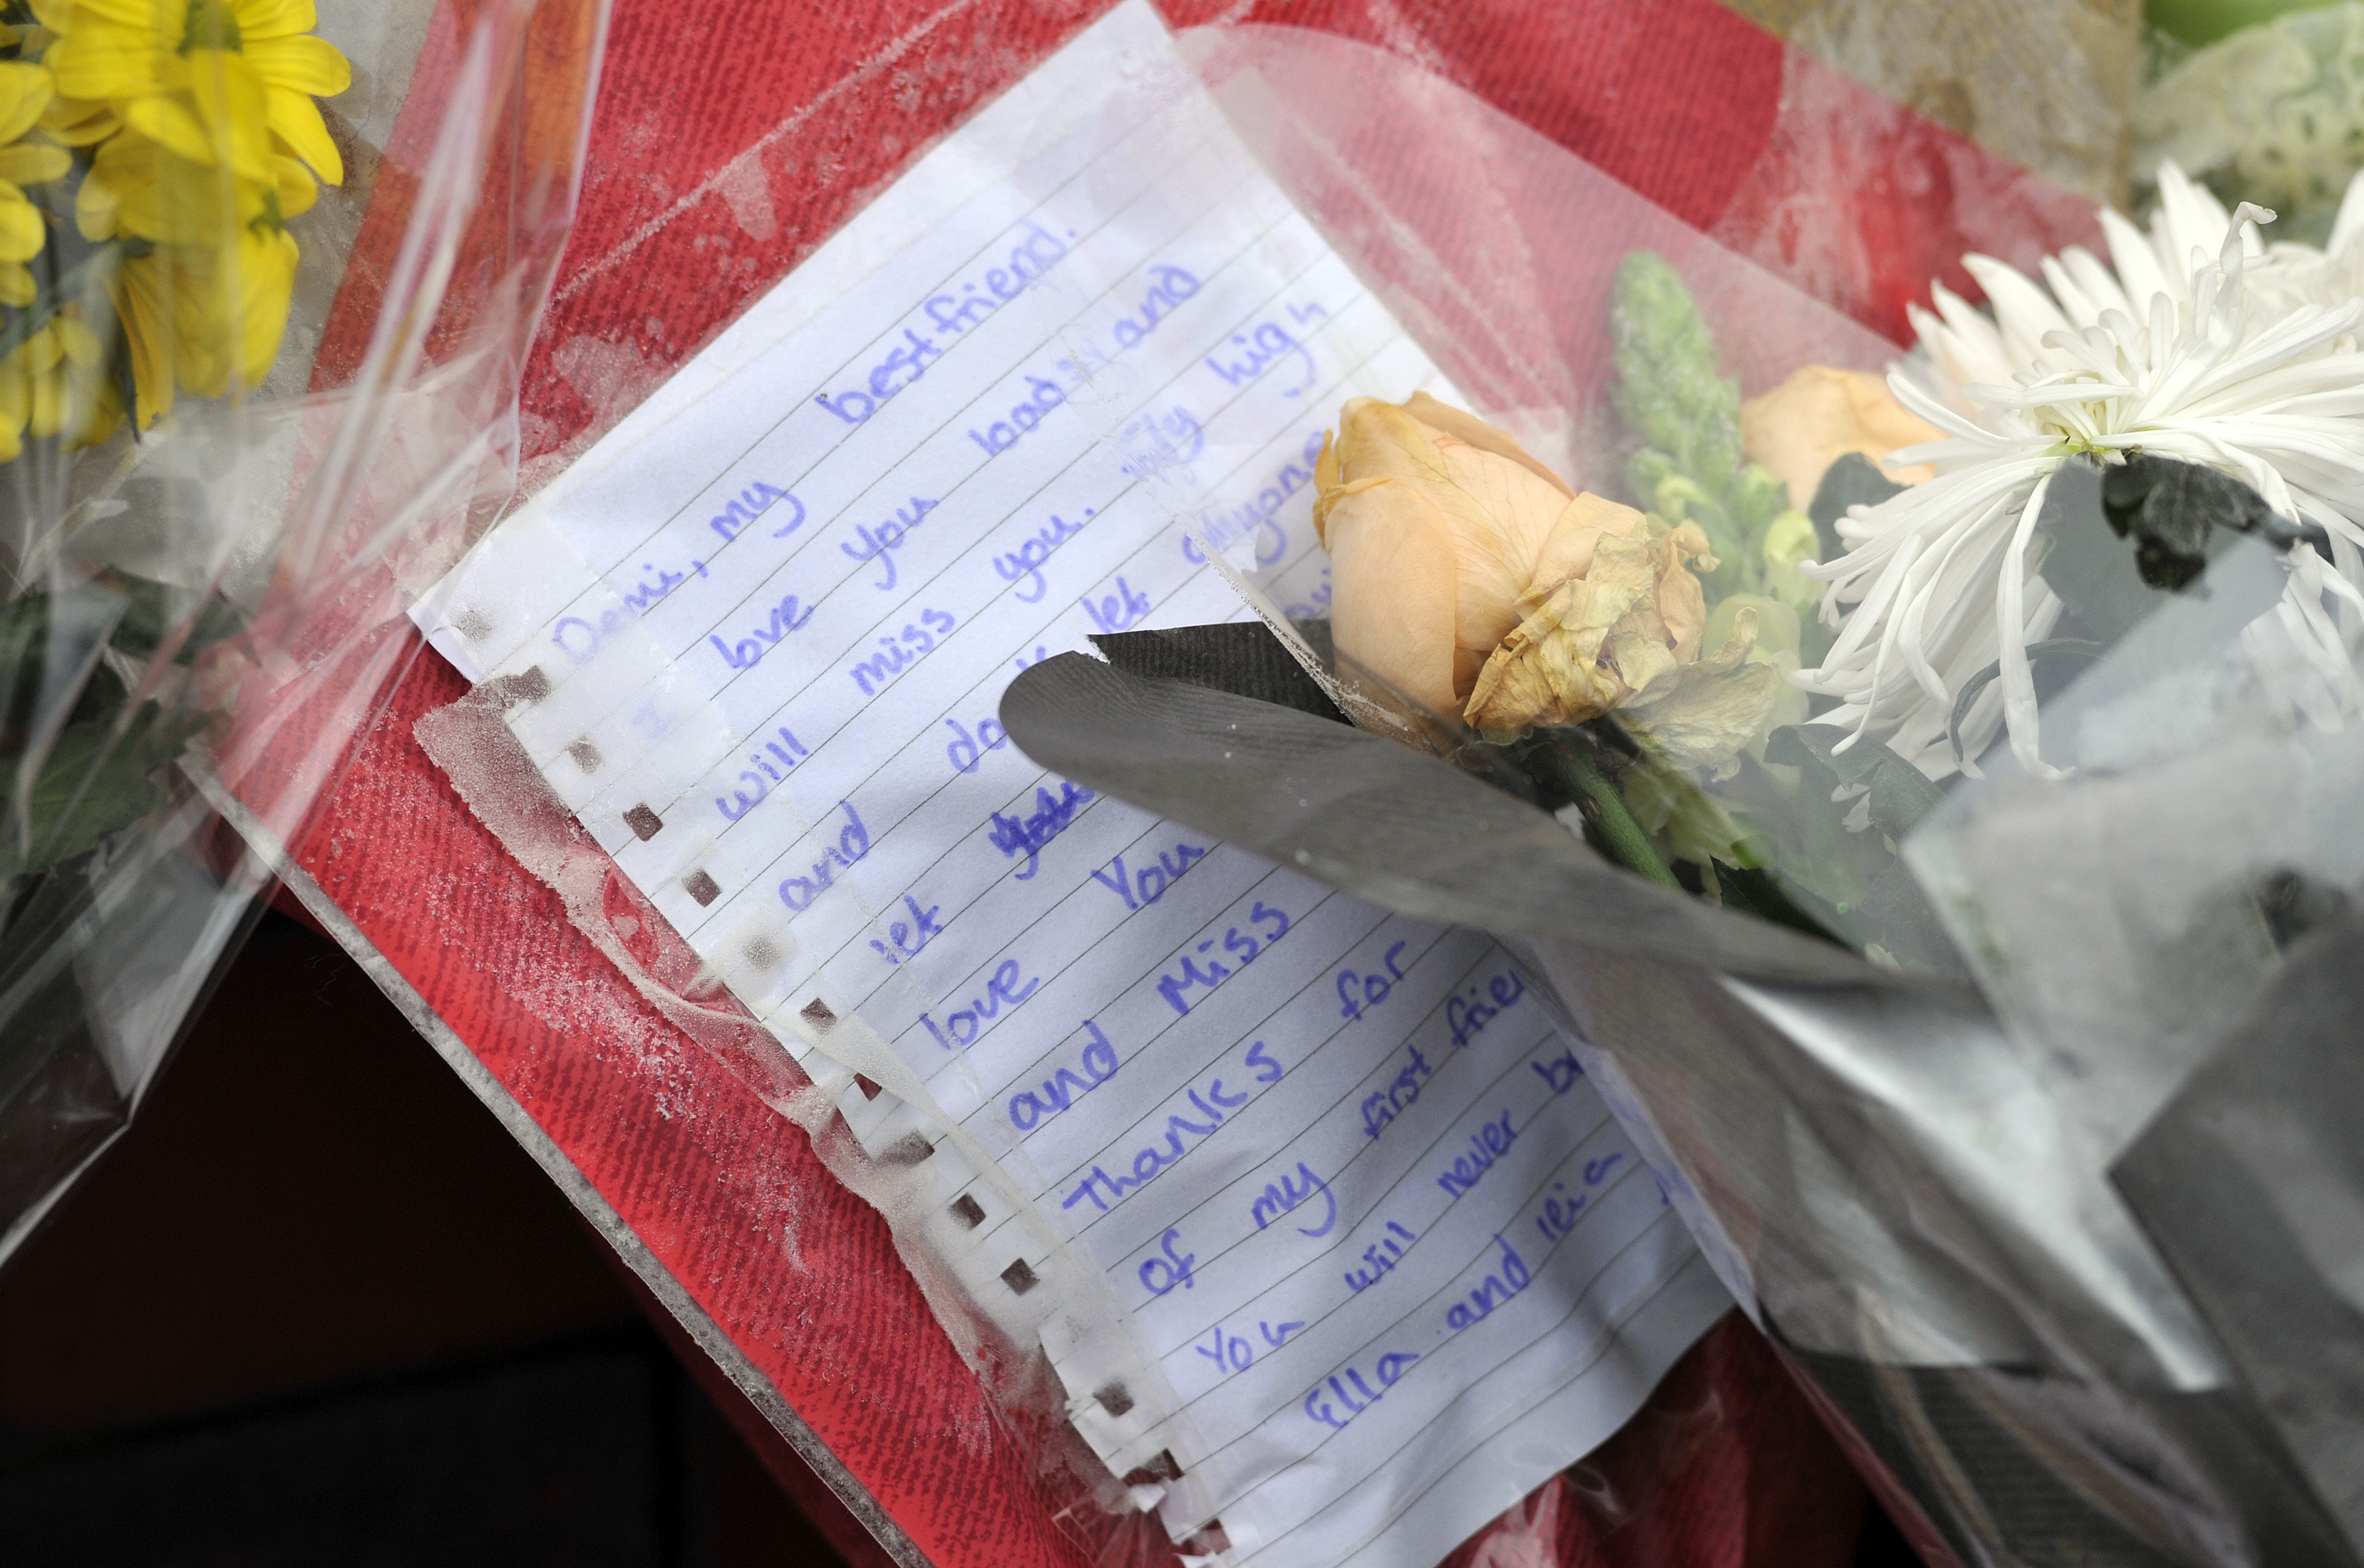 <strong>Tributes left to the victims&nbsp;</strong>